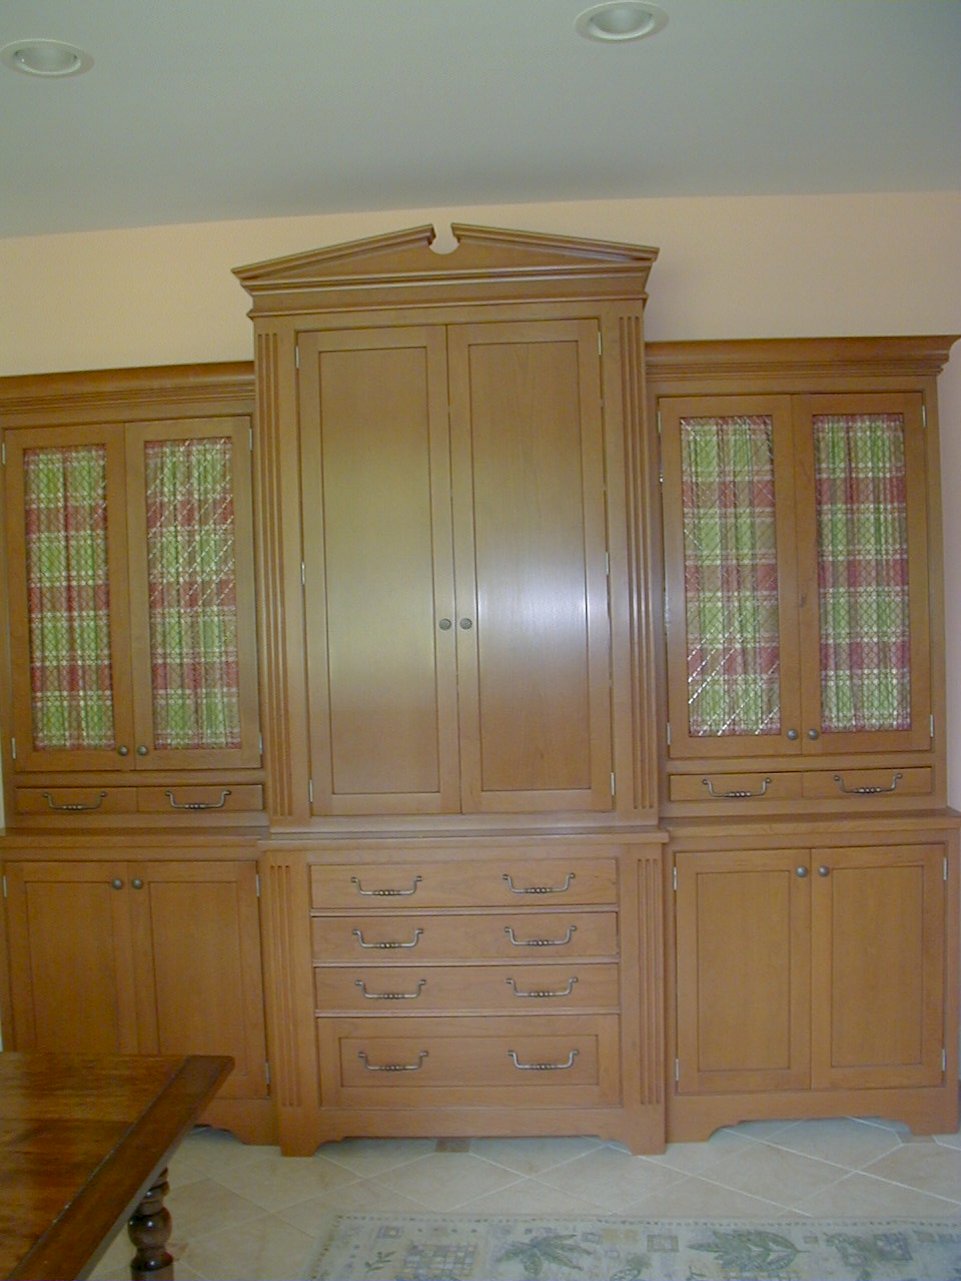 Front view of the cherry hutch.